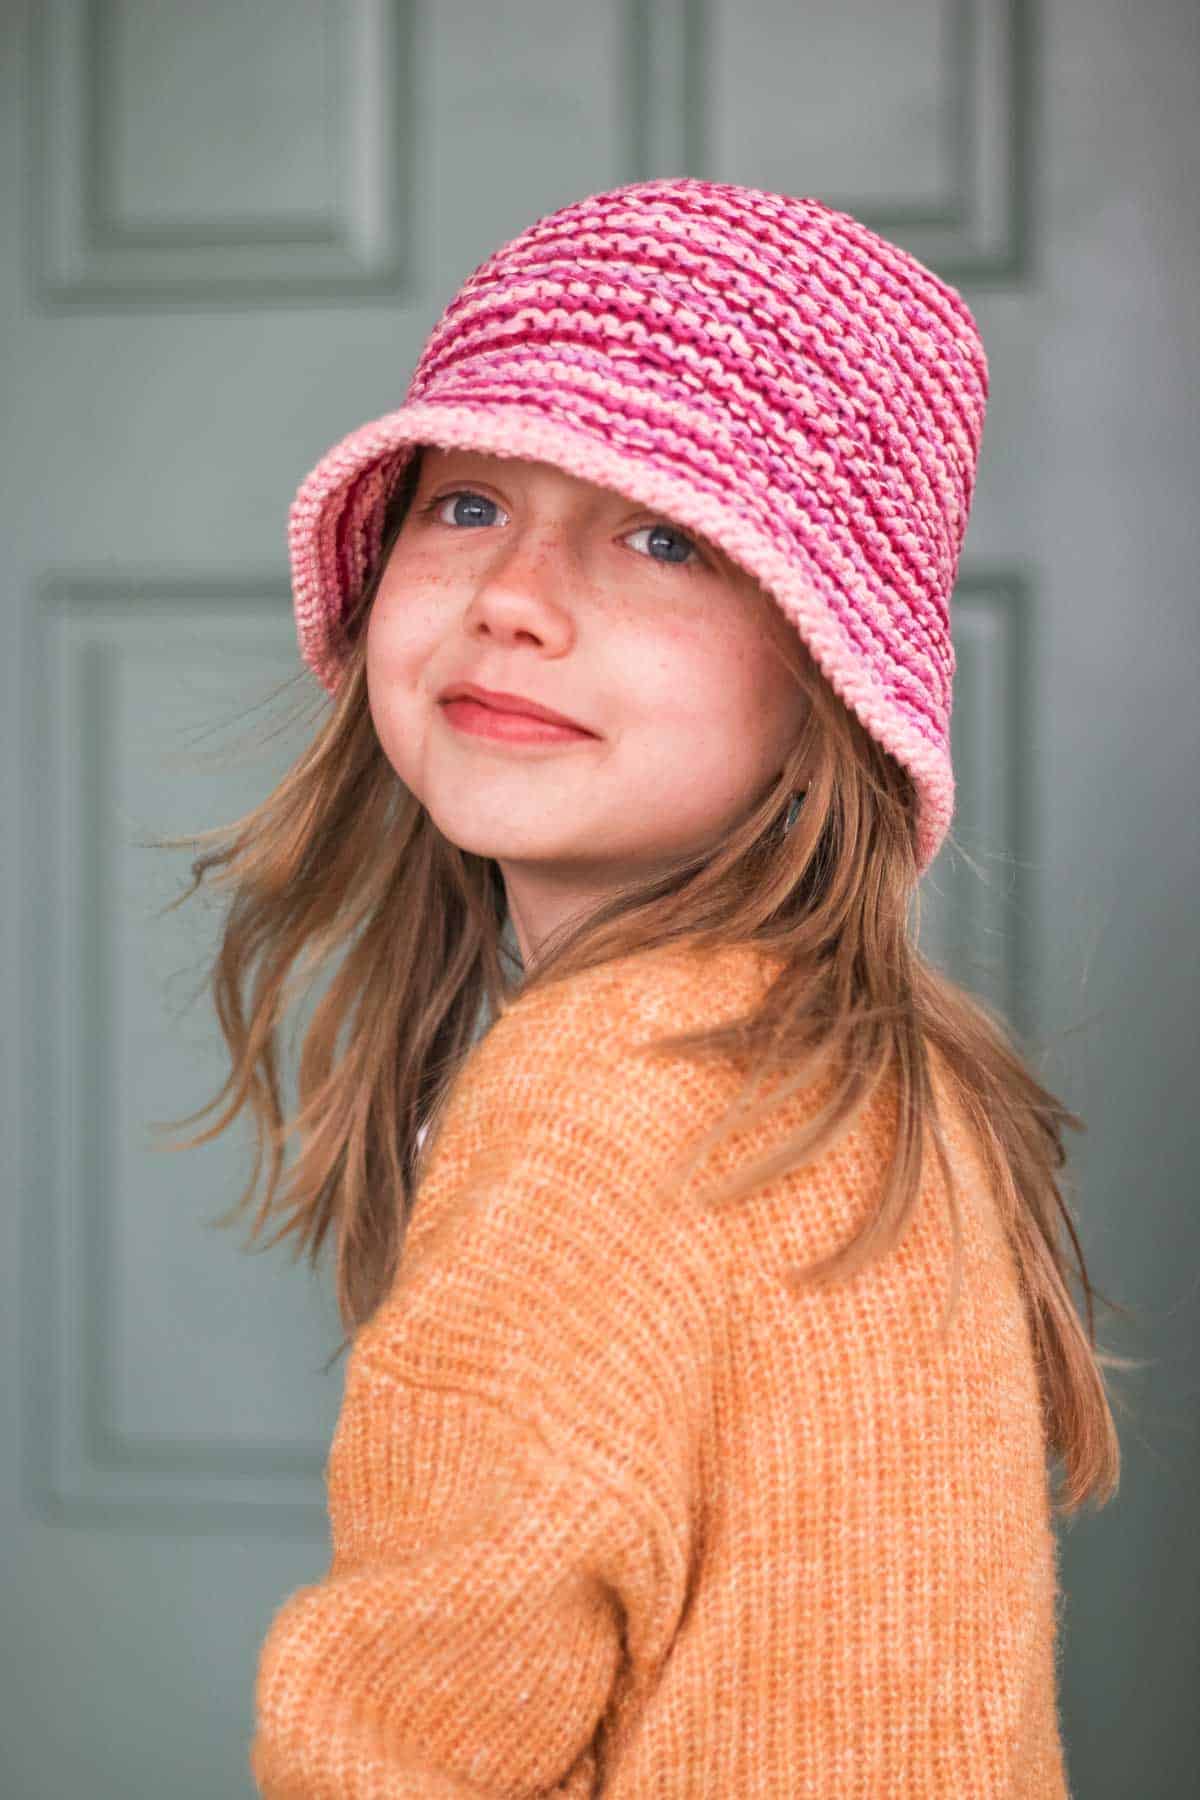 Child wearing a pink knit bucket hat, looking in the distance.